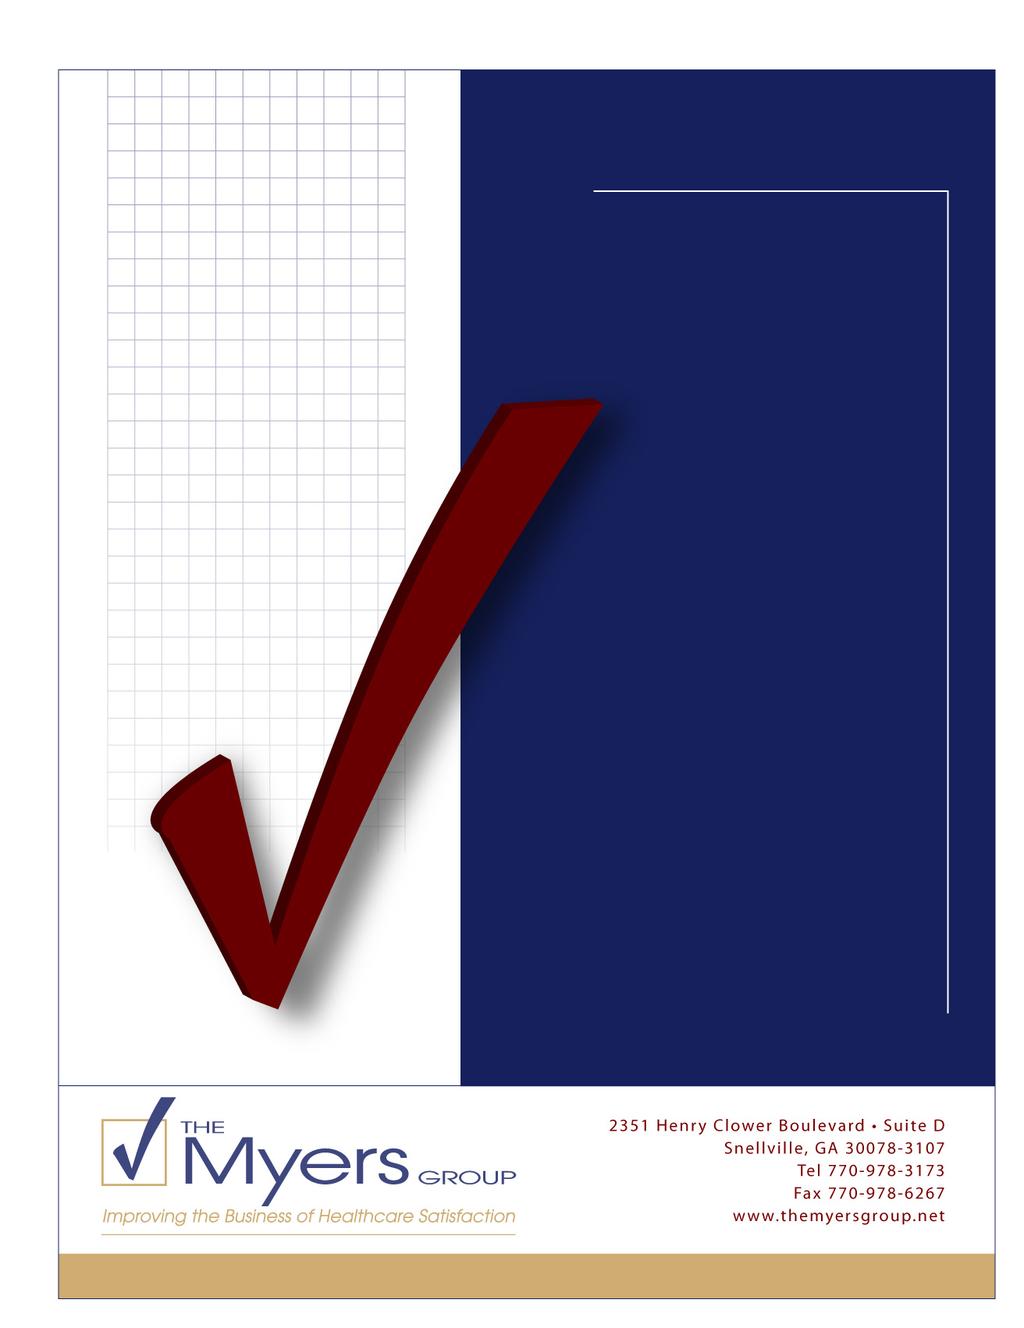 Final Report for Consumer Assessment of Healthcare Providers and Systems (CAHPS ) Survey CAHPS